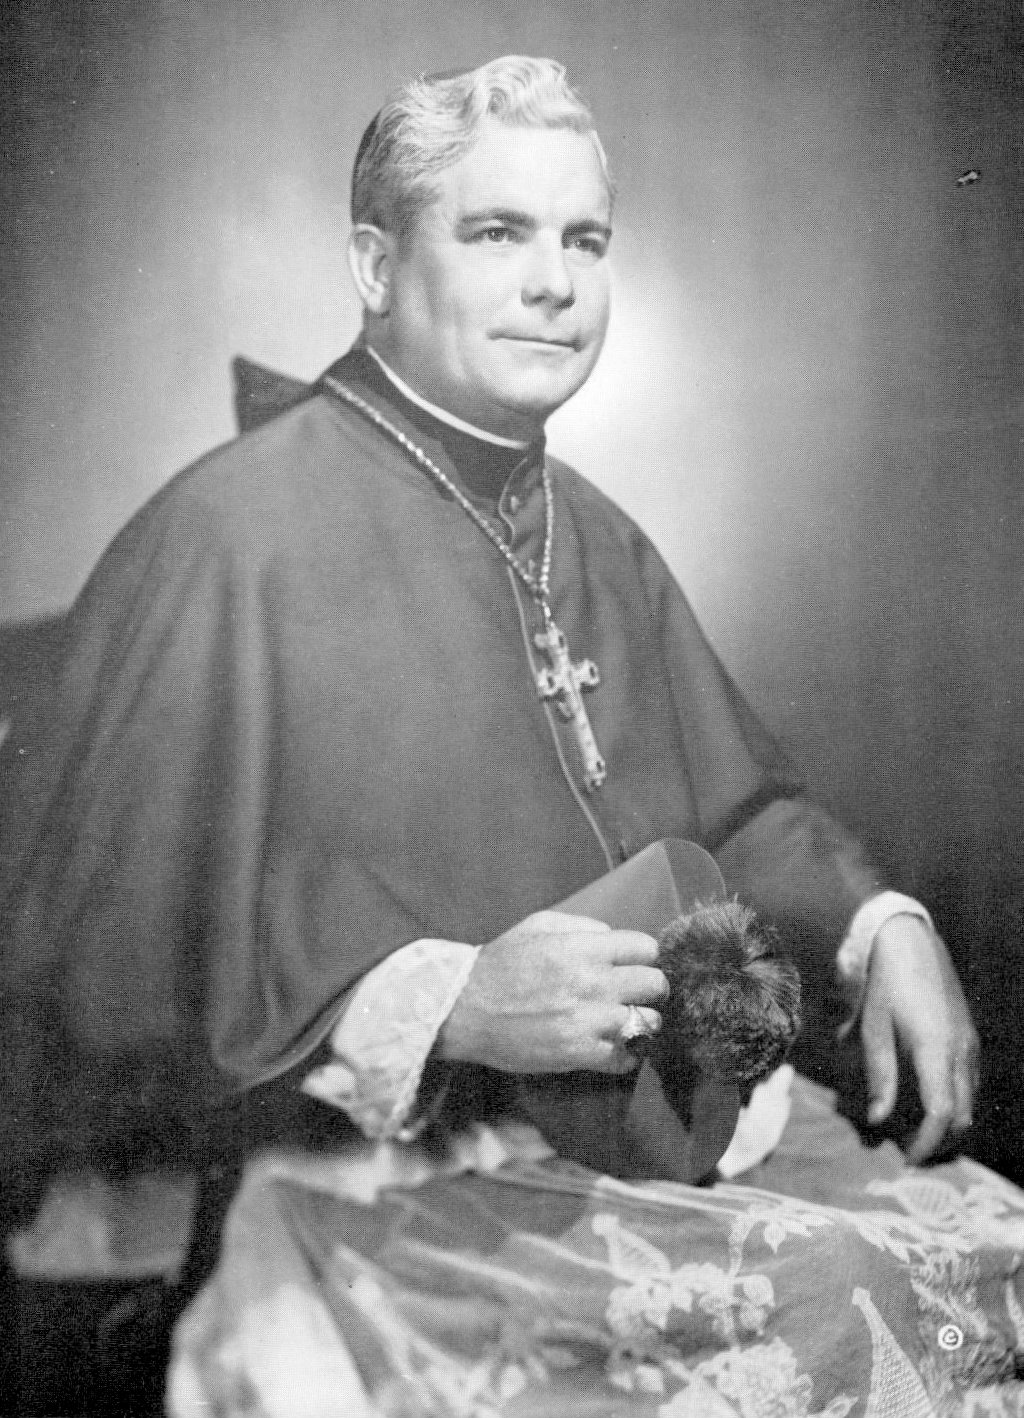 Bishop Russell J. McVinney is pictured here in this 1960 official portrait.